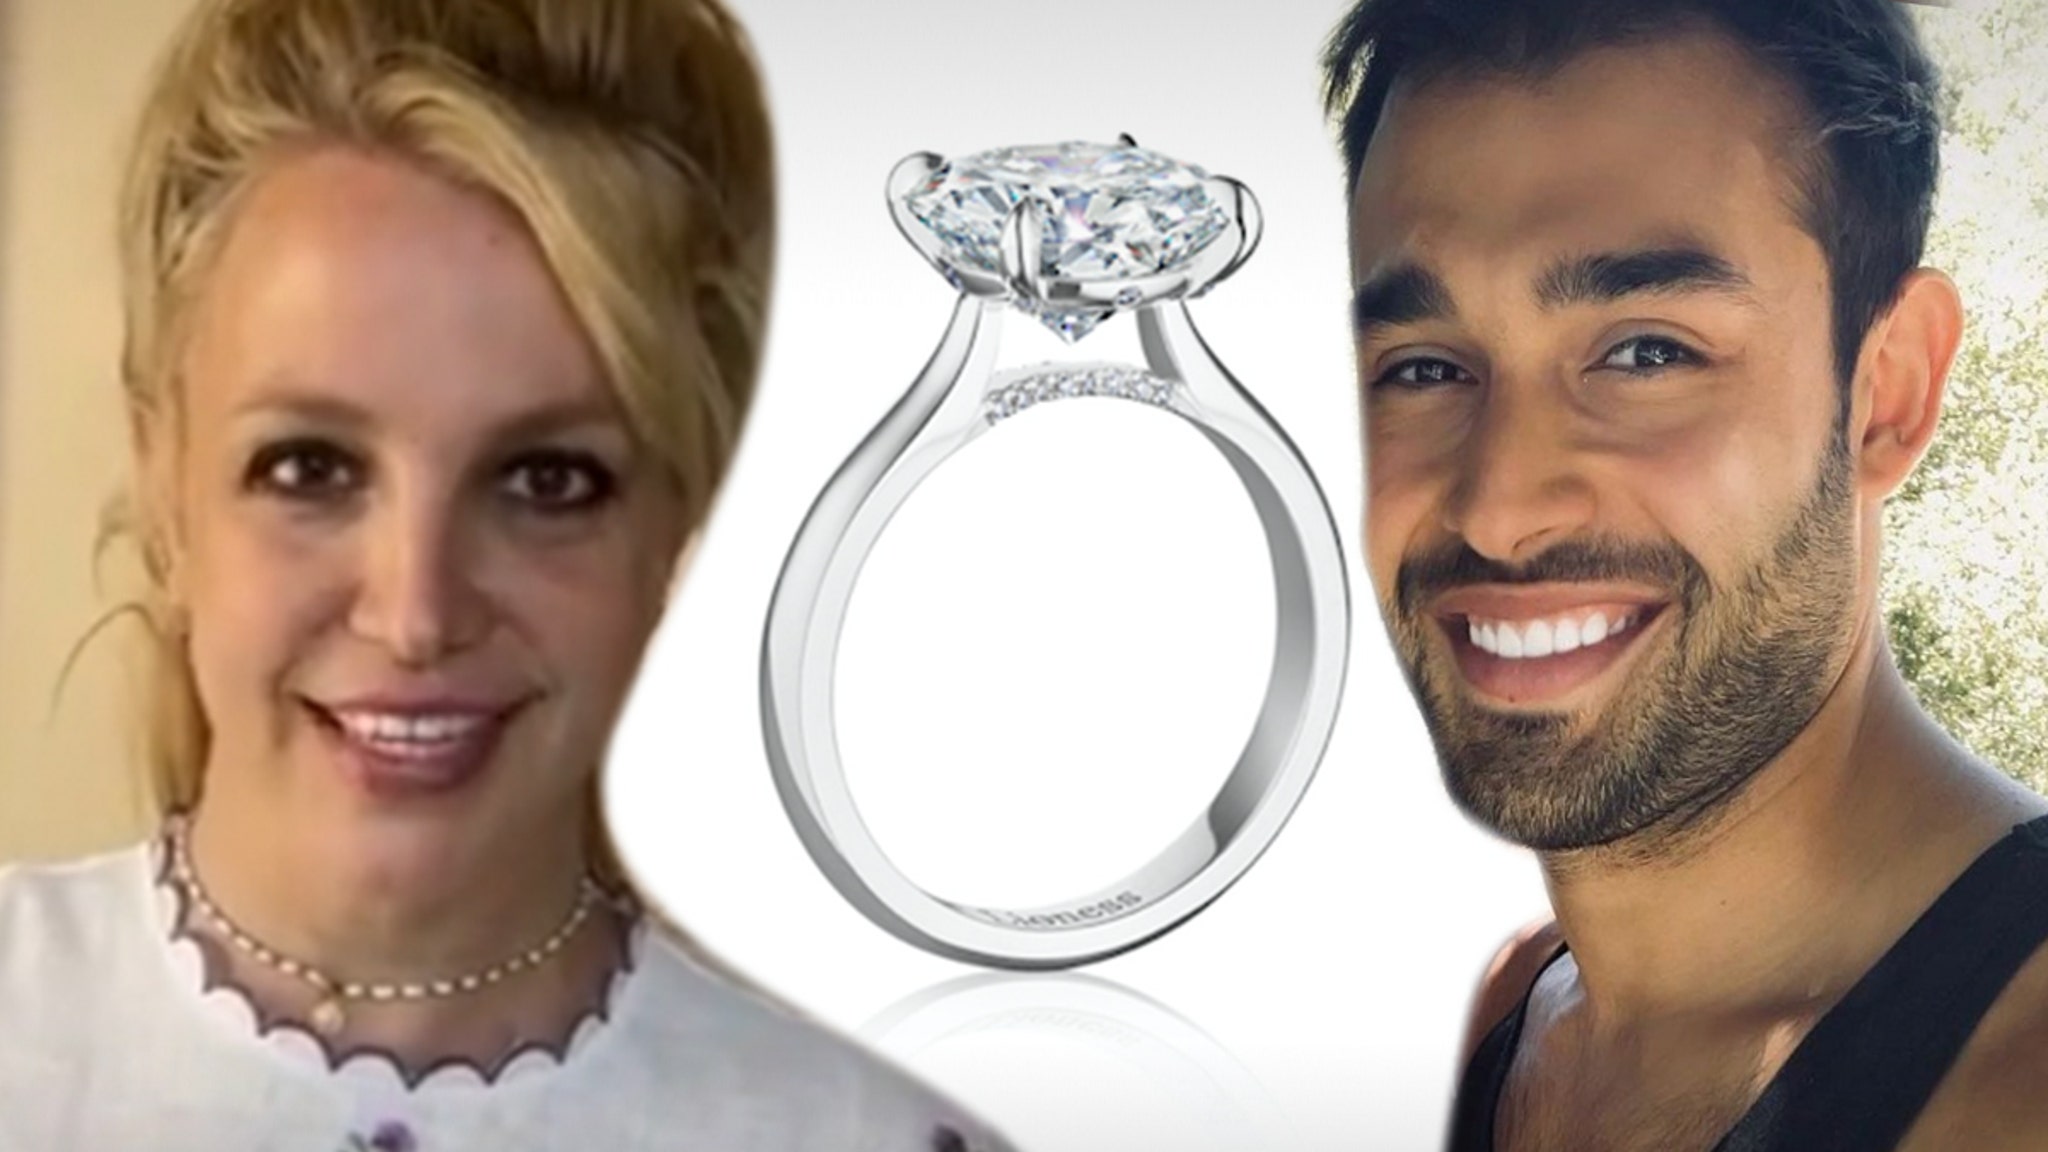 Britney Spears' Engagement Ring a Hot Commodity, Wedding Date Not Near - TMZ